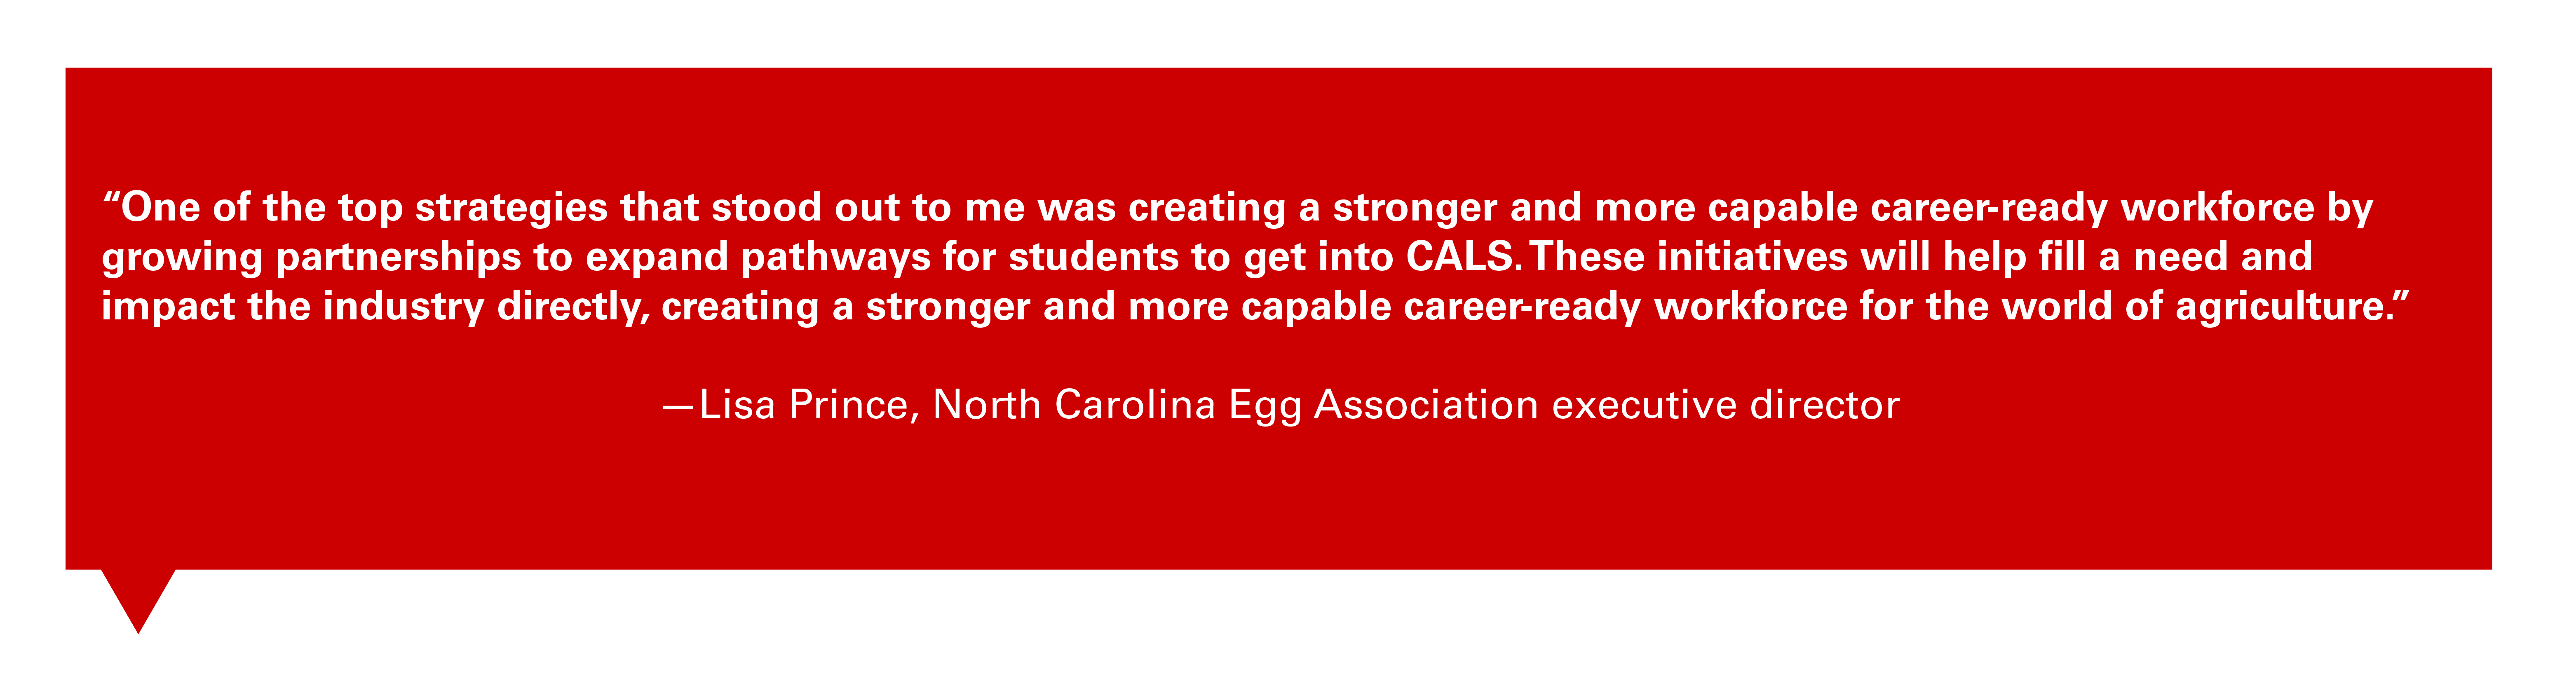 Quote from Lisa Prince, North Carolina Egg Association executive director: "One of the top strategies that stood out to me was creating a stronger and more capable career-ready workforce by growing partnerships to expand pathways for students to get into CALS. These initiatives will help fill a need and impact the industry directly, creating a stronger and more capable career-ready workforce for the world of agriculture."